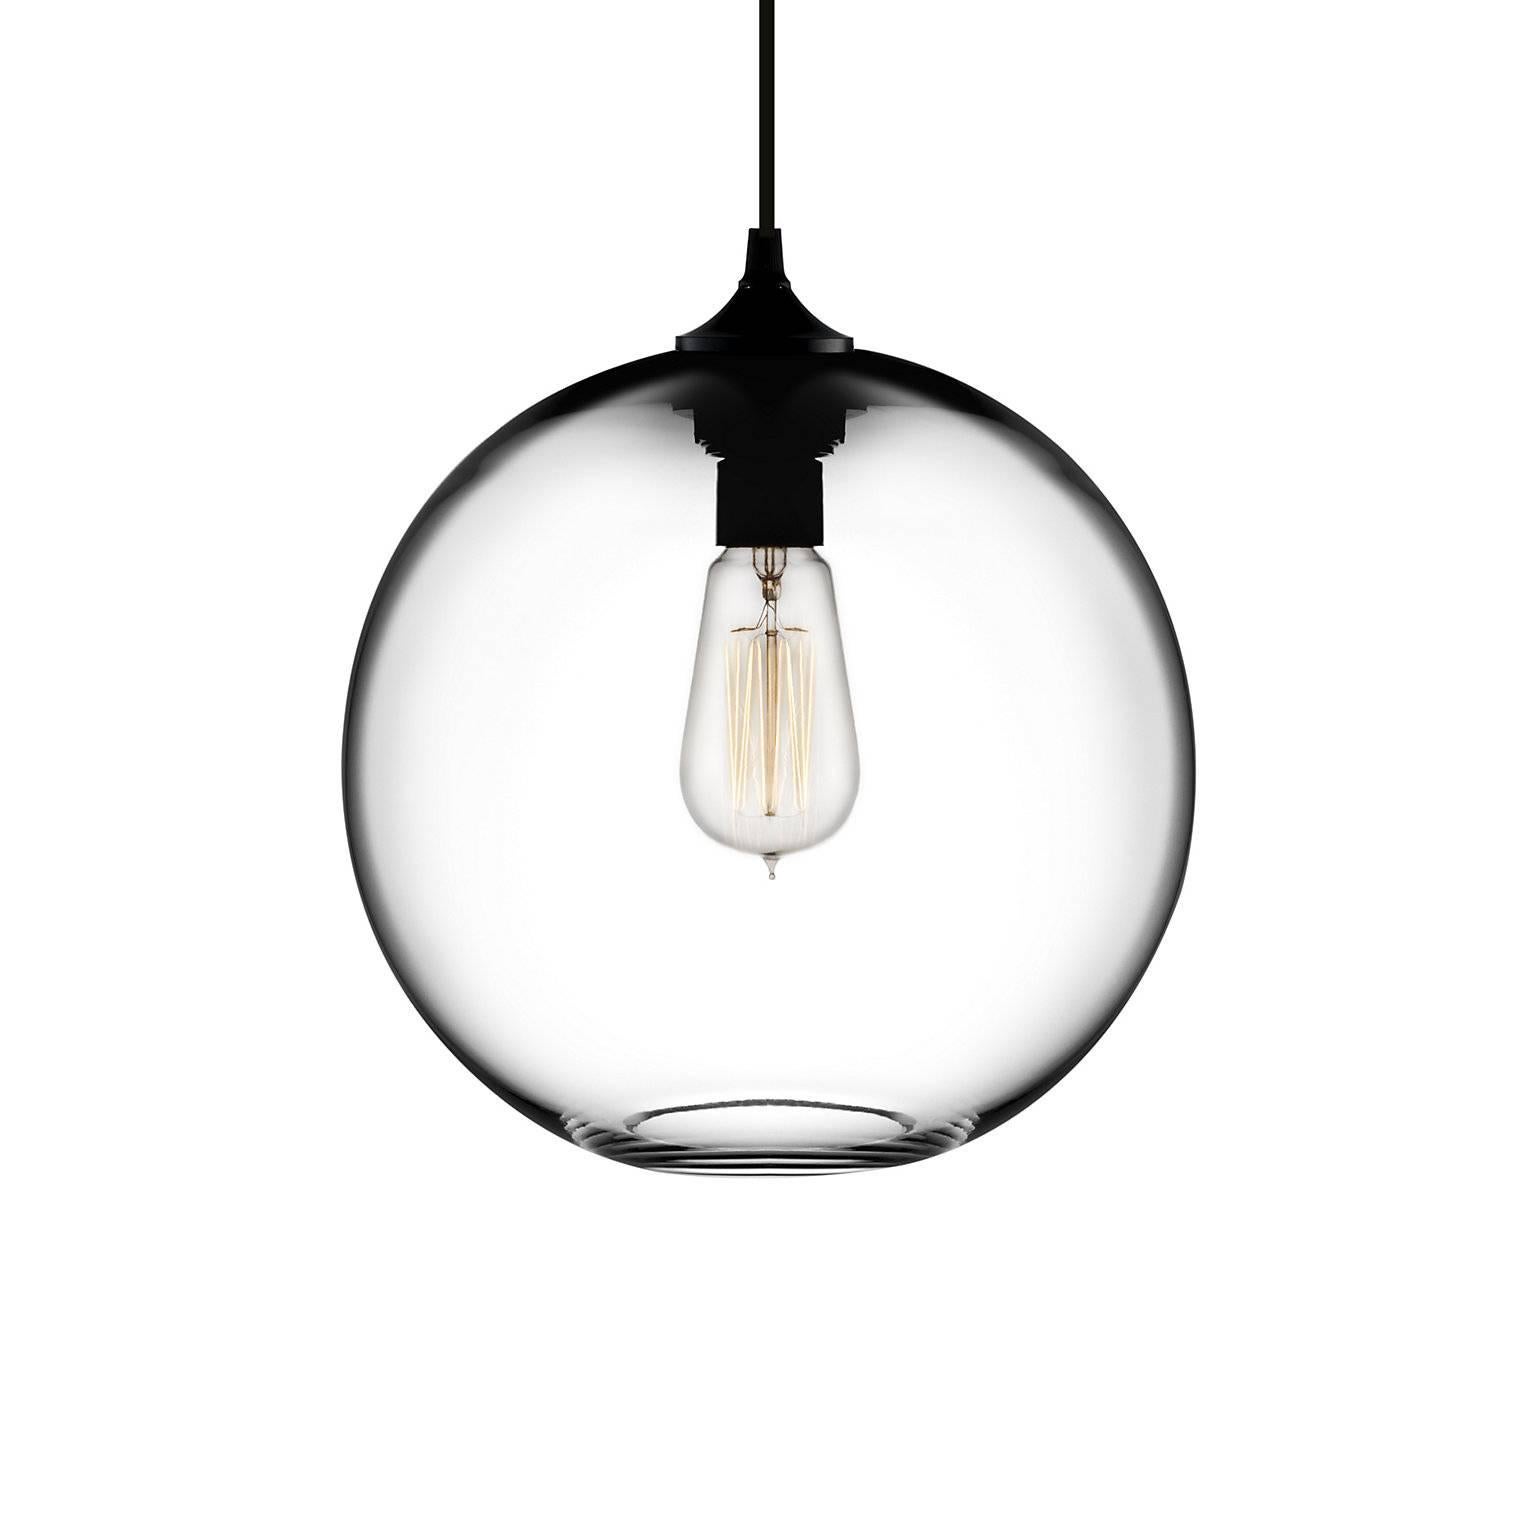 The Edison bulb at the center of the signature Solitaire pendant and the cylindrical shape of the glass body harmonize to accentuate enduring quality and beauty. Every single glass pendant light that comes from Niche is hand-blown by real human